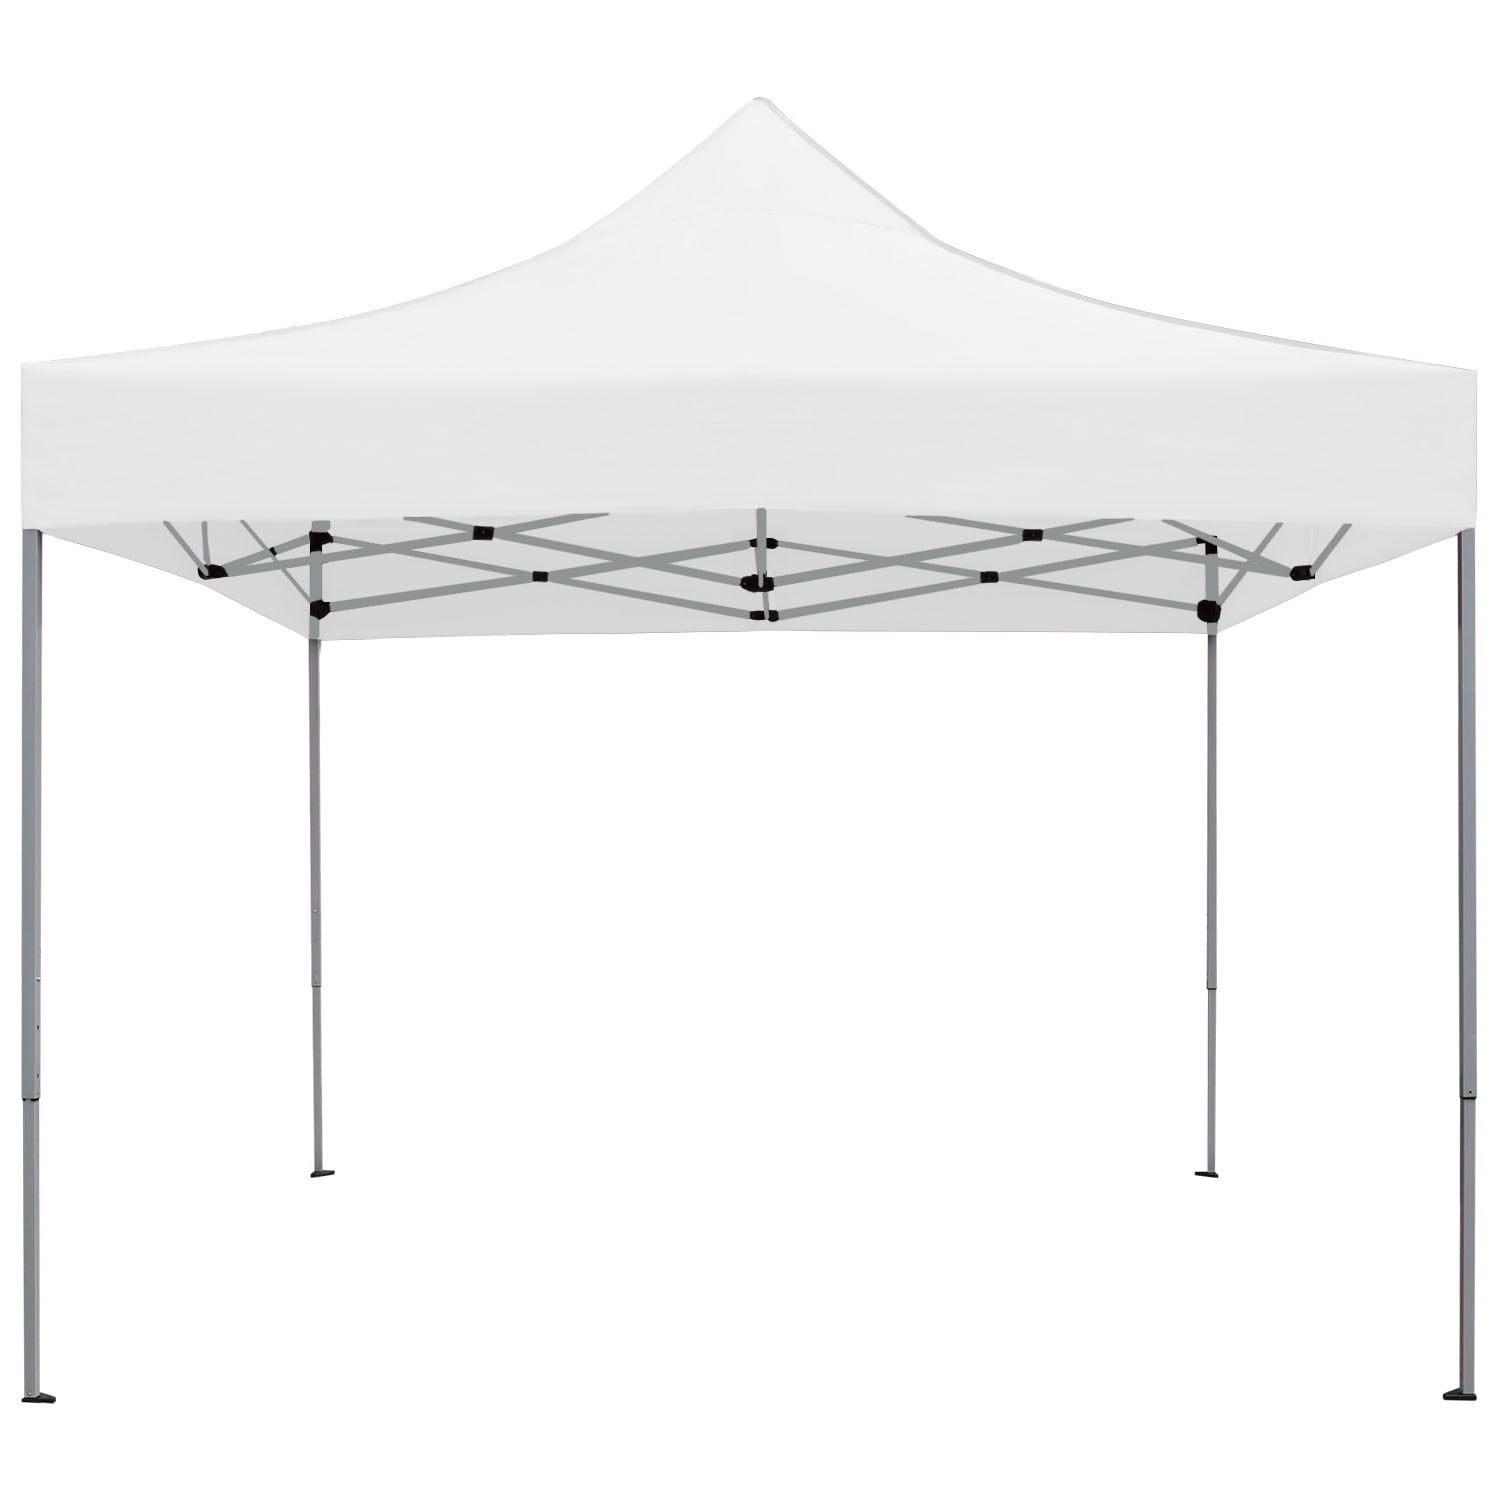 Lacoo 10' x 10' Pop-up Canopy with Straight Legs Wedding Party Tent ...